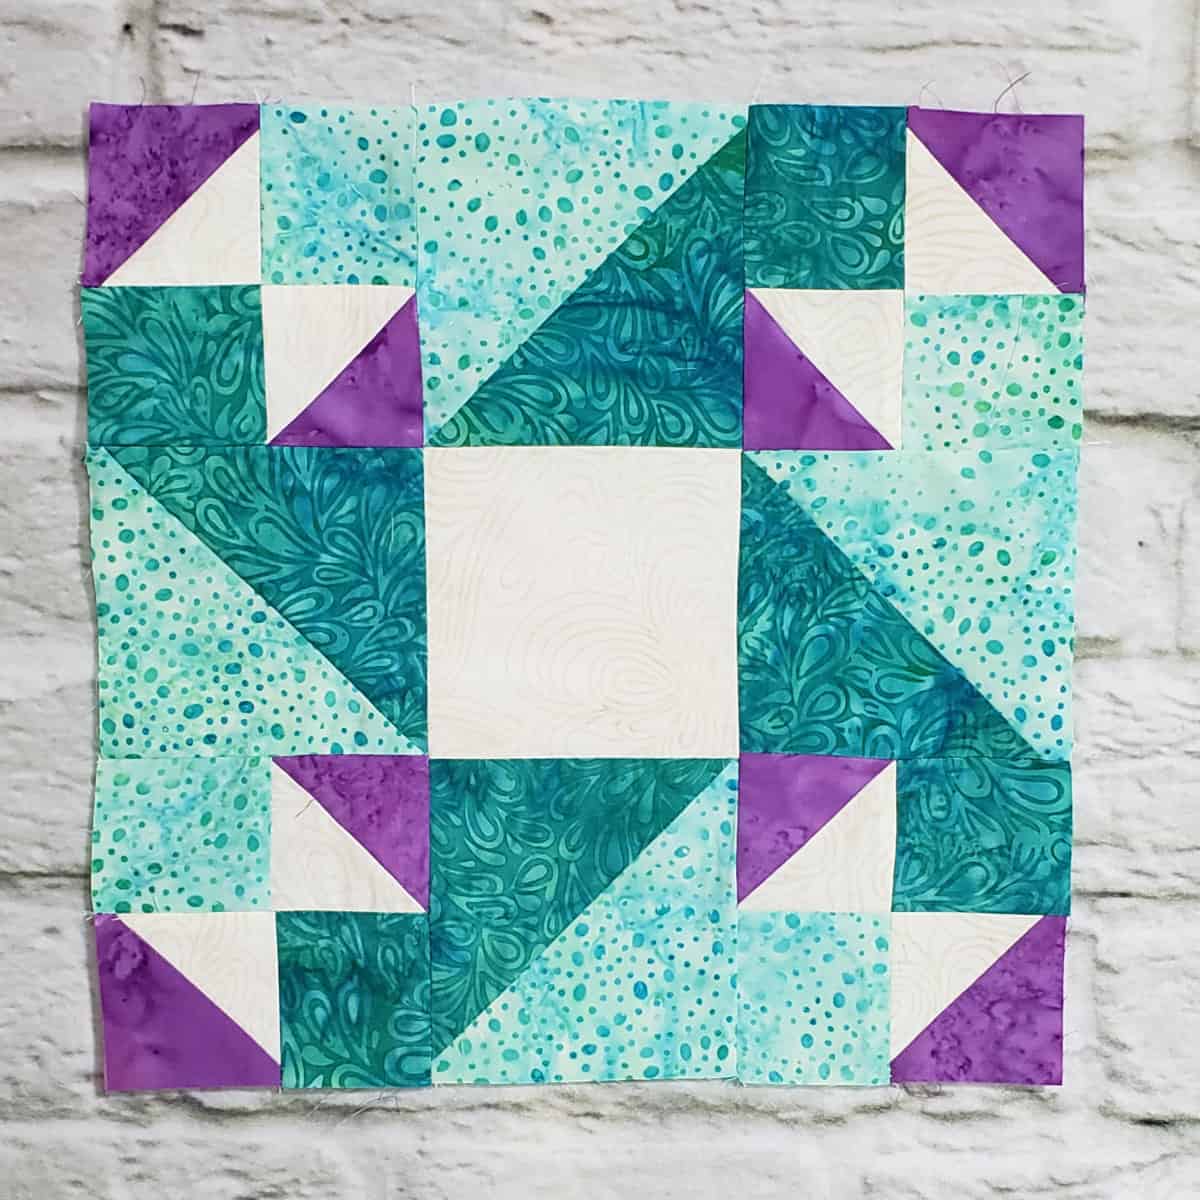 9 Patch Indiana Star Quilt Block